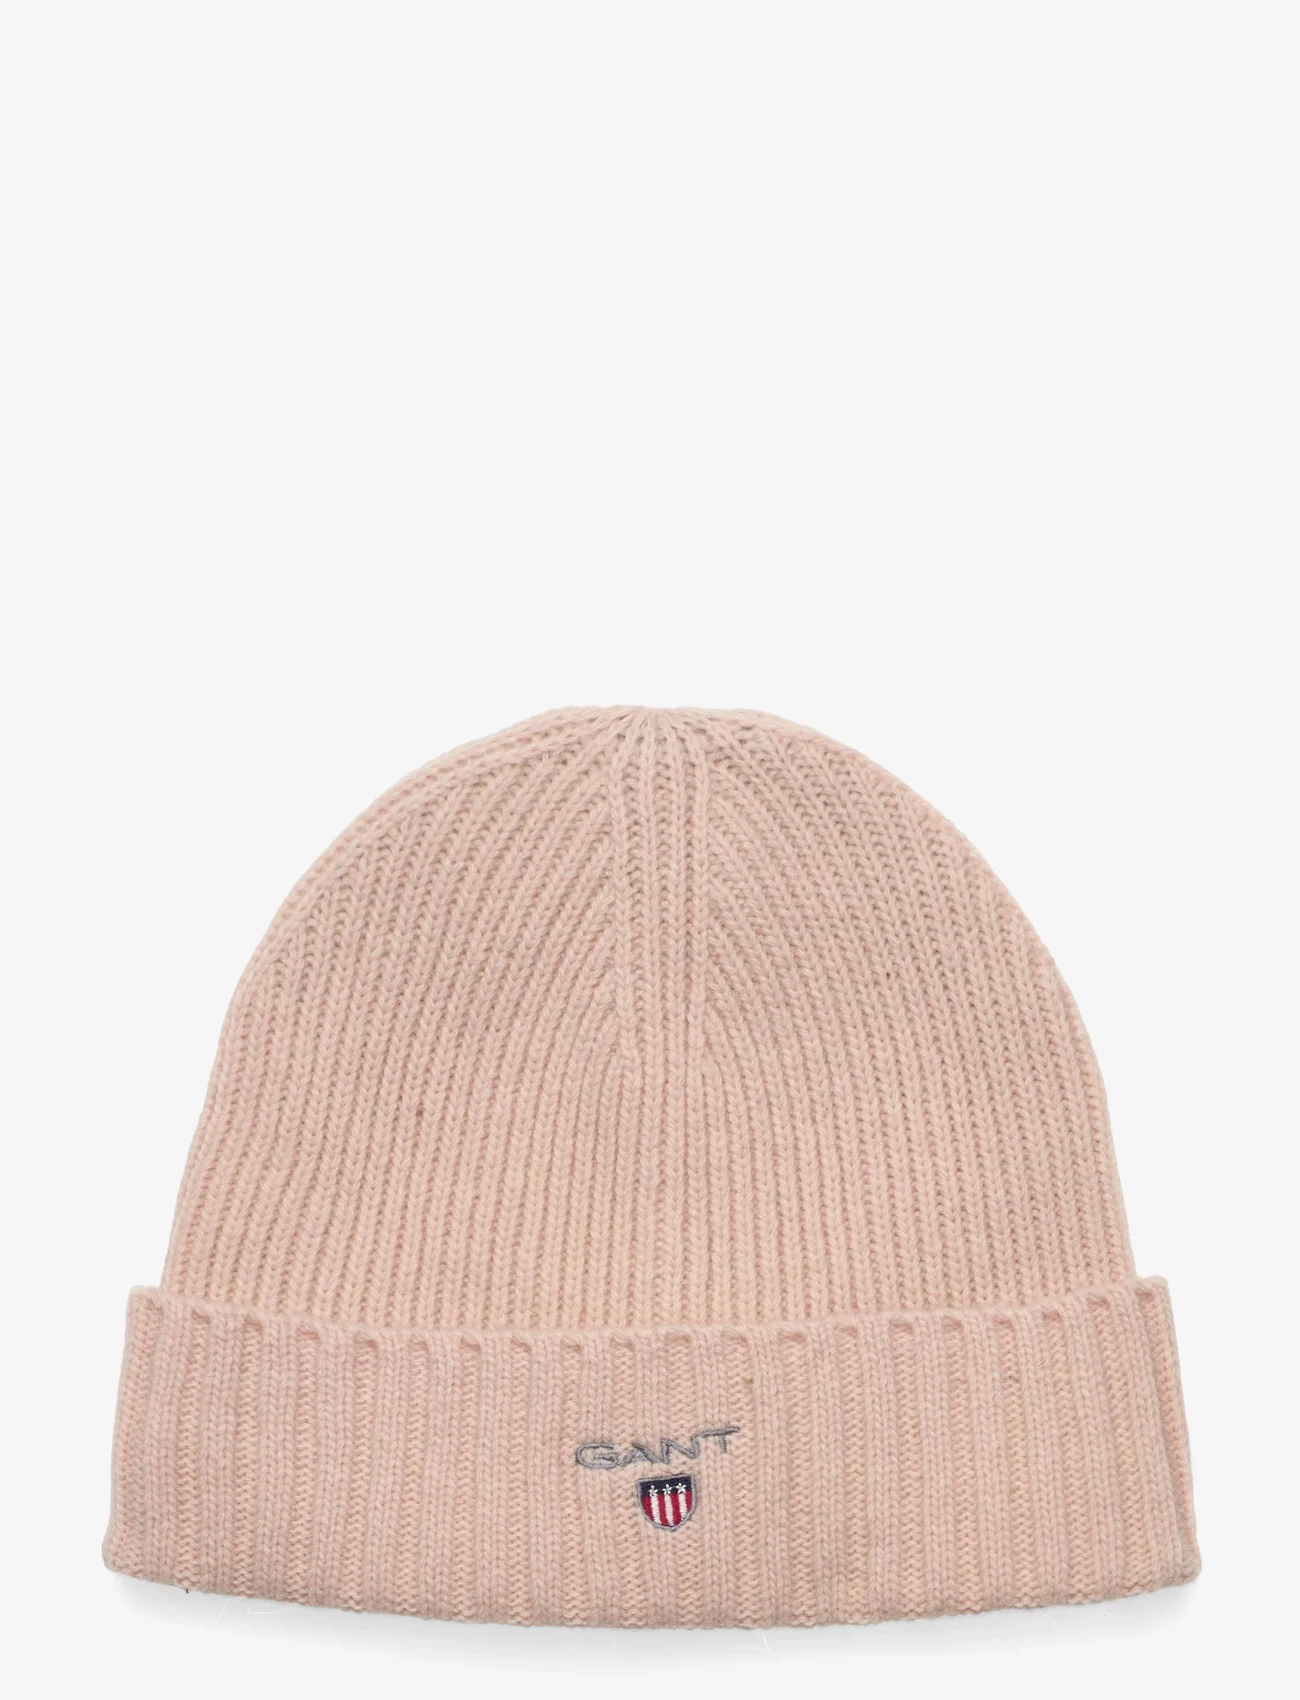 GANT - D1. WOOL LINED BEANIE - beanies - silver peony - 0